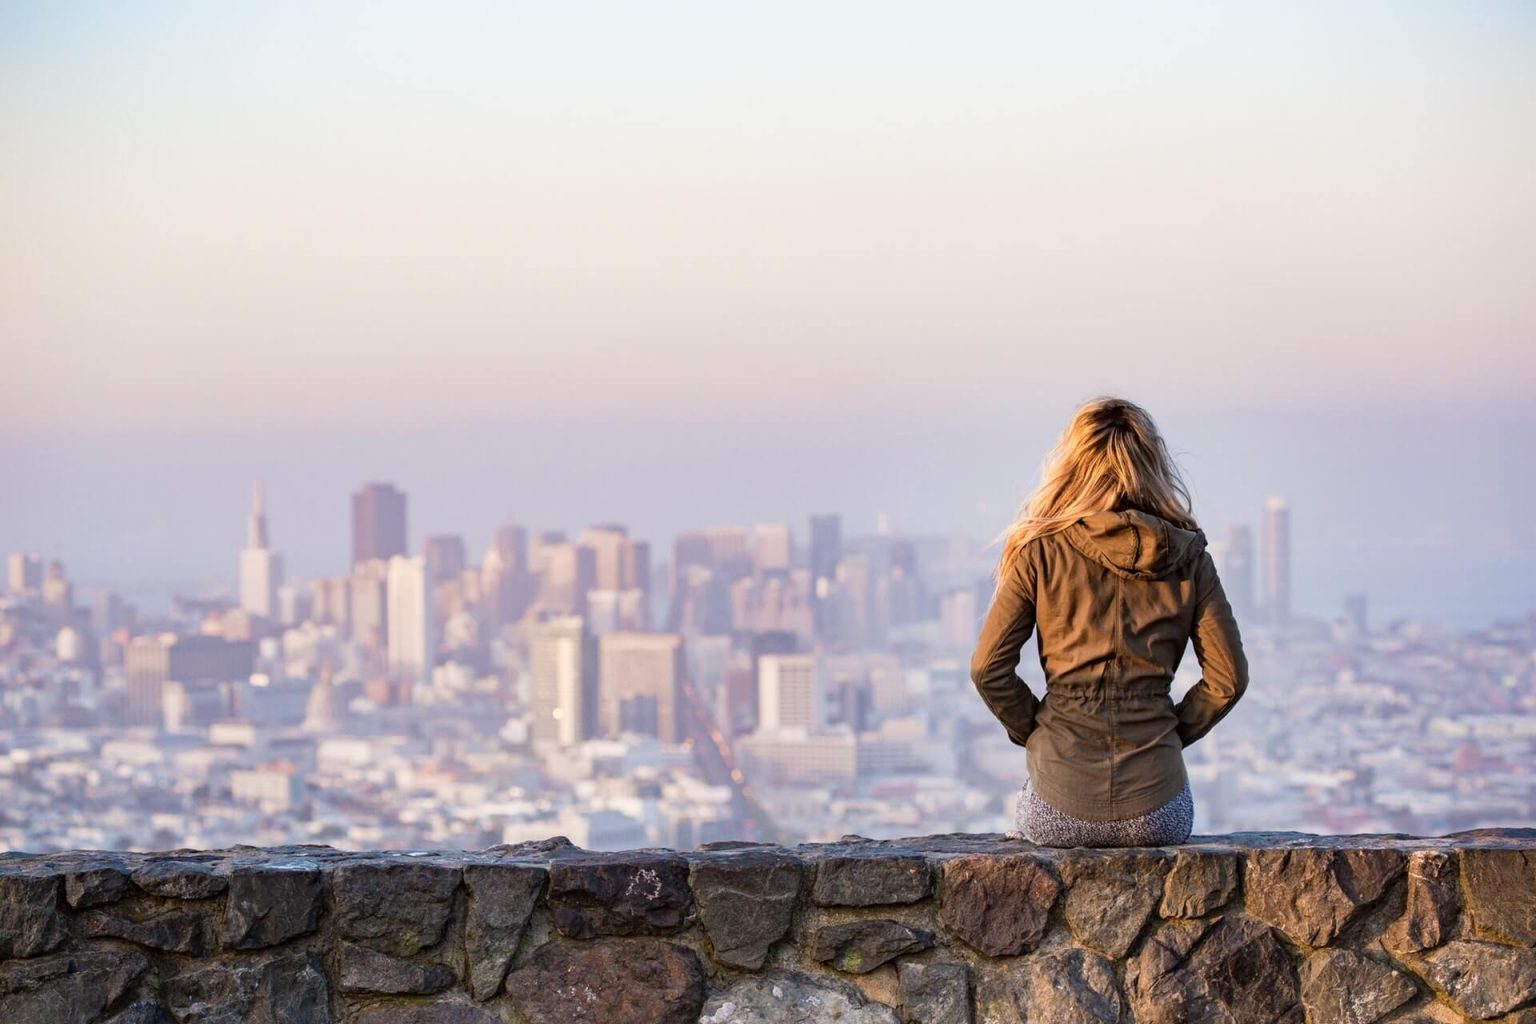 A woman on a rock overlooking a big city